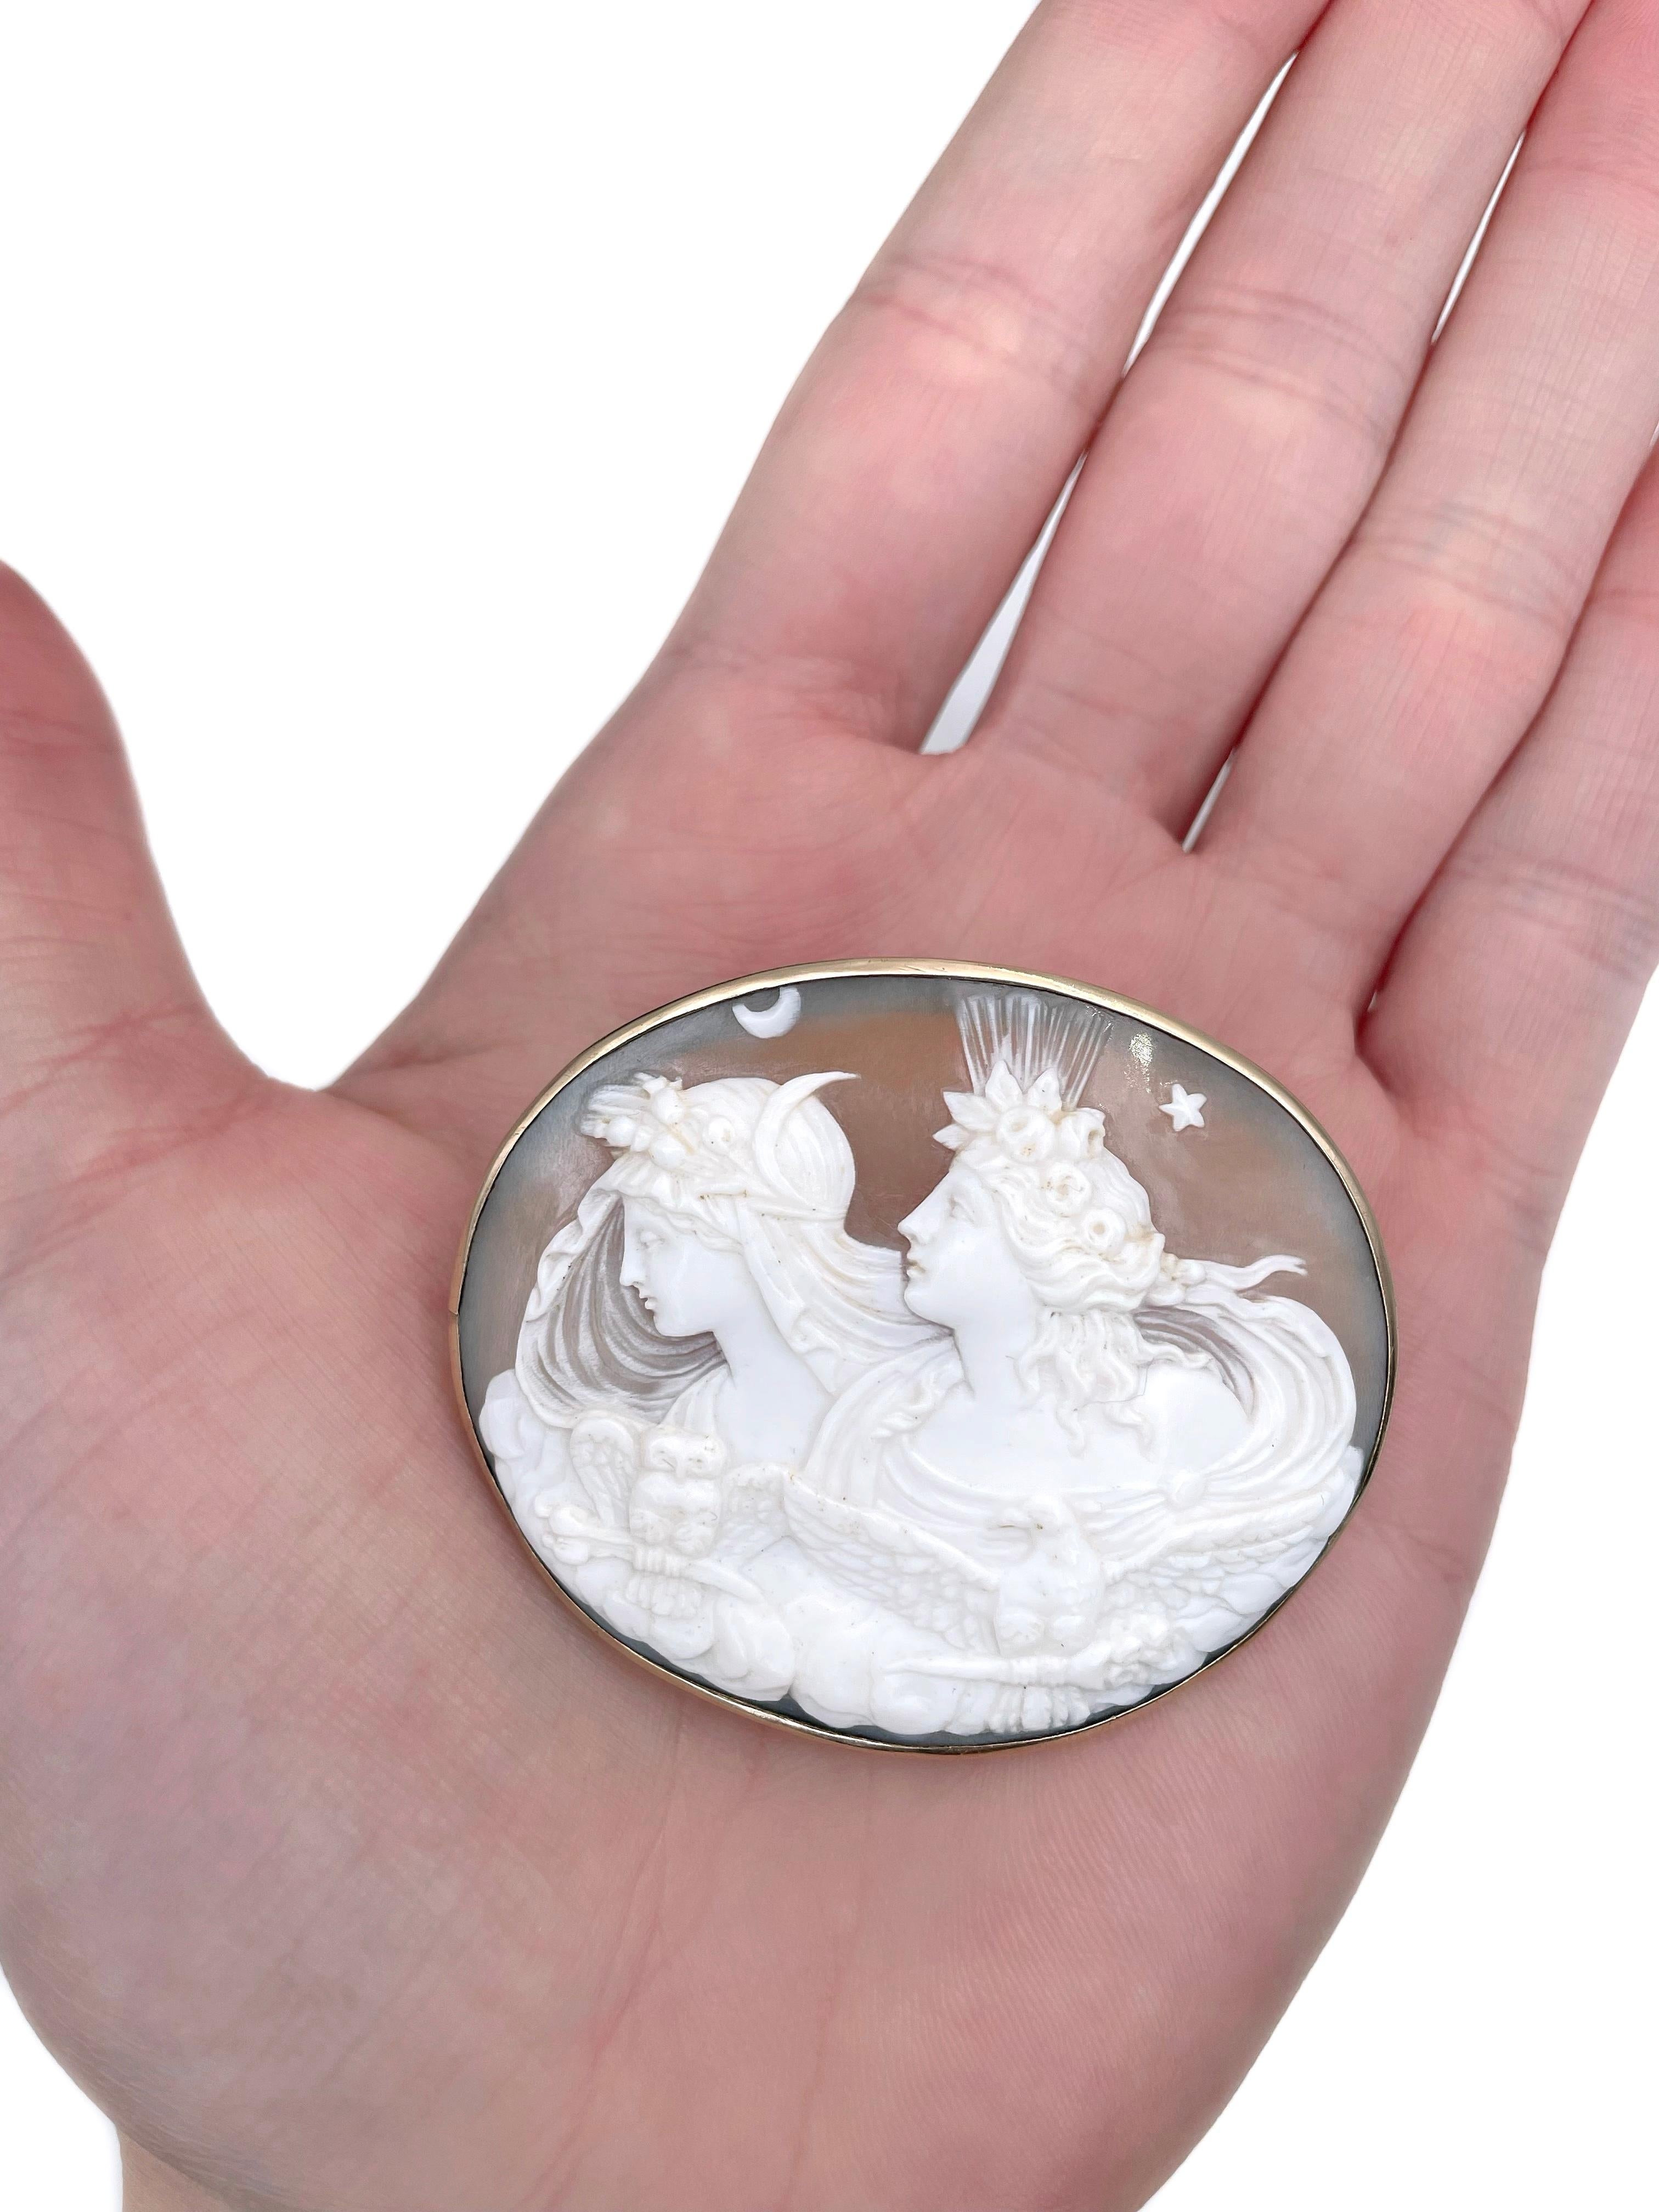 This is a Victorian oval pin brooch - the allegory of the Day and Night. Circa 1870. 

It features a shell cameo depicting Eos (Greek goddess of Dawn) and Nyx (Greek goddess of night).

The frame with a needle is crafted in base metal and is gold